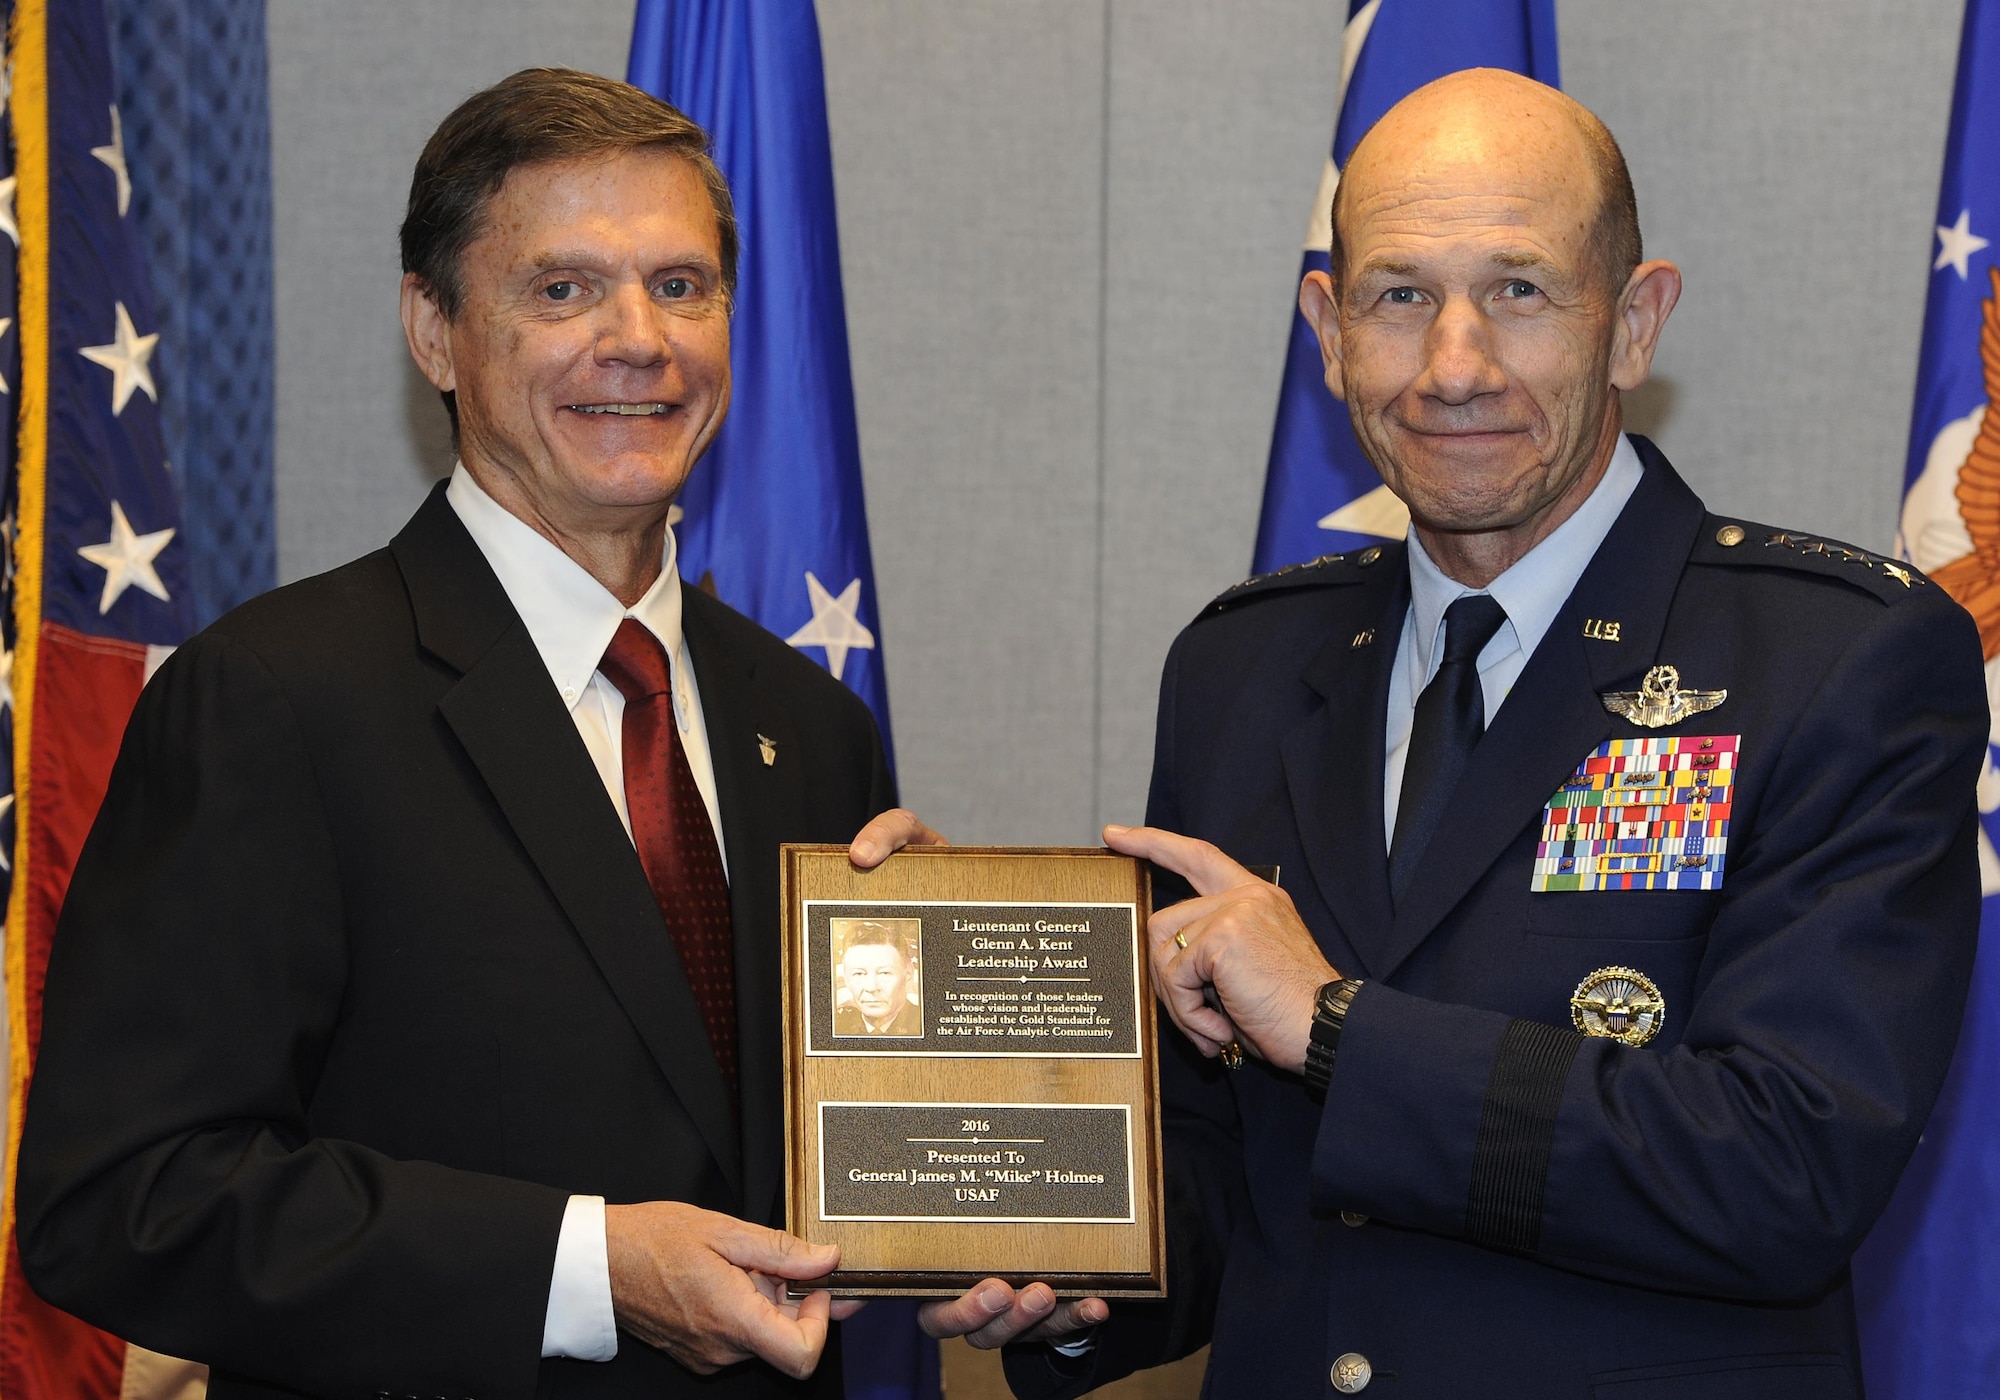 Gen. Mike Holmes, the Air Combat Command commander, is honored for analysis work with the Lt. Gen. Glenn A. Kent Leadership Award, presented by Kevin Williams, the director of Air Force Studies, Analyses and Assessments, during a July 11, 2017, ceremony at the Pentagon. The Kent Award recognizes influential leaders who have had substantive analytic responsibilities during their career and whose vision and leadership have had a significant and lasting effect on the achievements of Air Force analysis. (U.S. Air Force photo/Tech. Sgt. Robert Barnett)